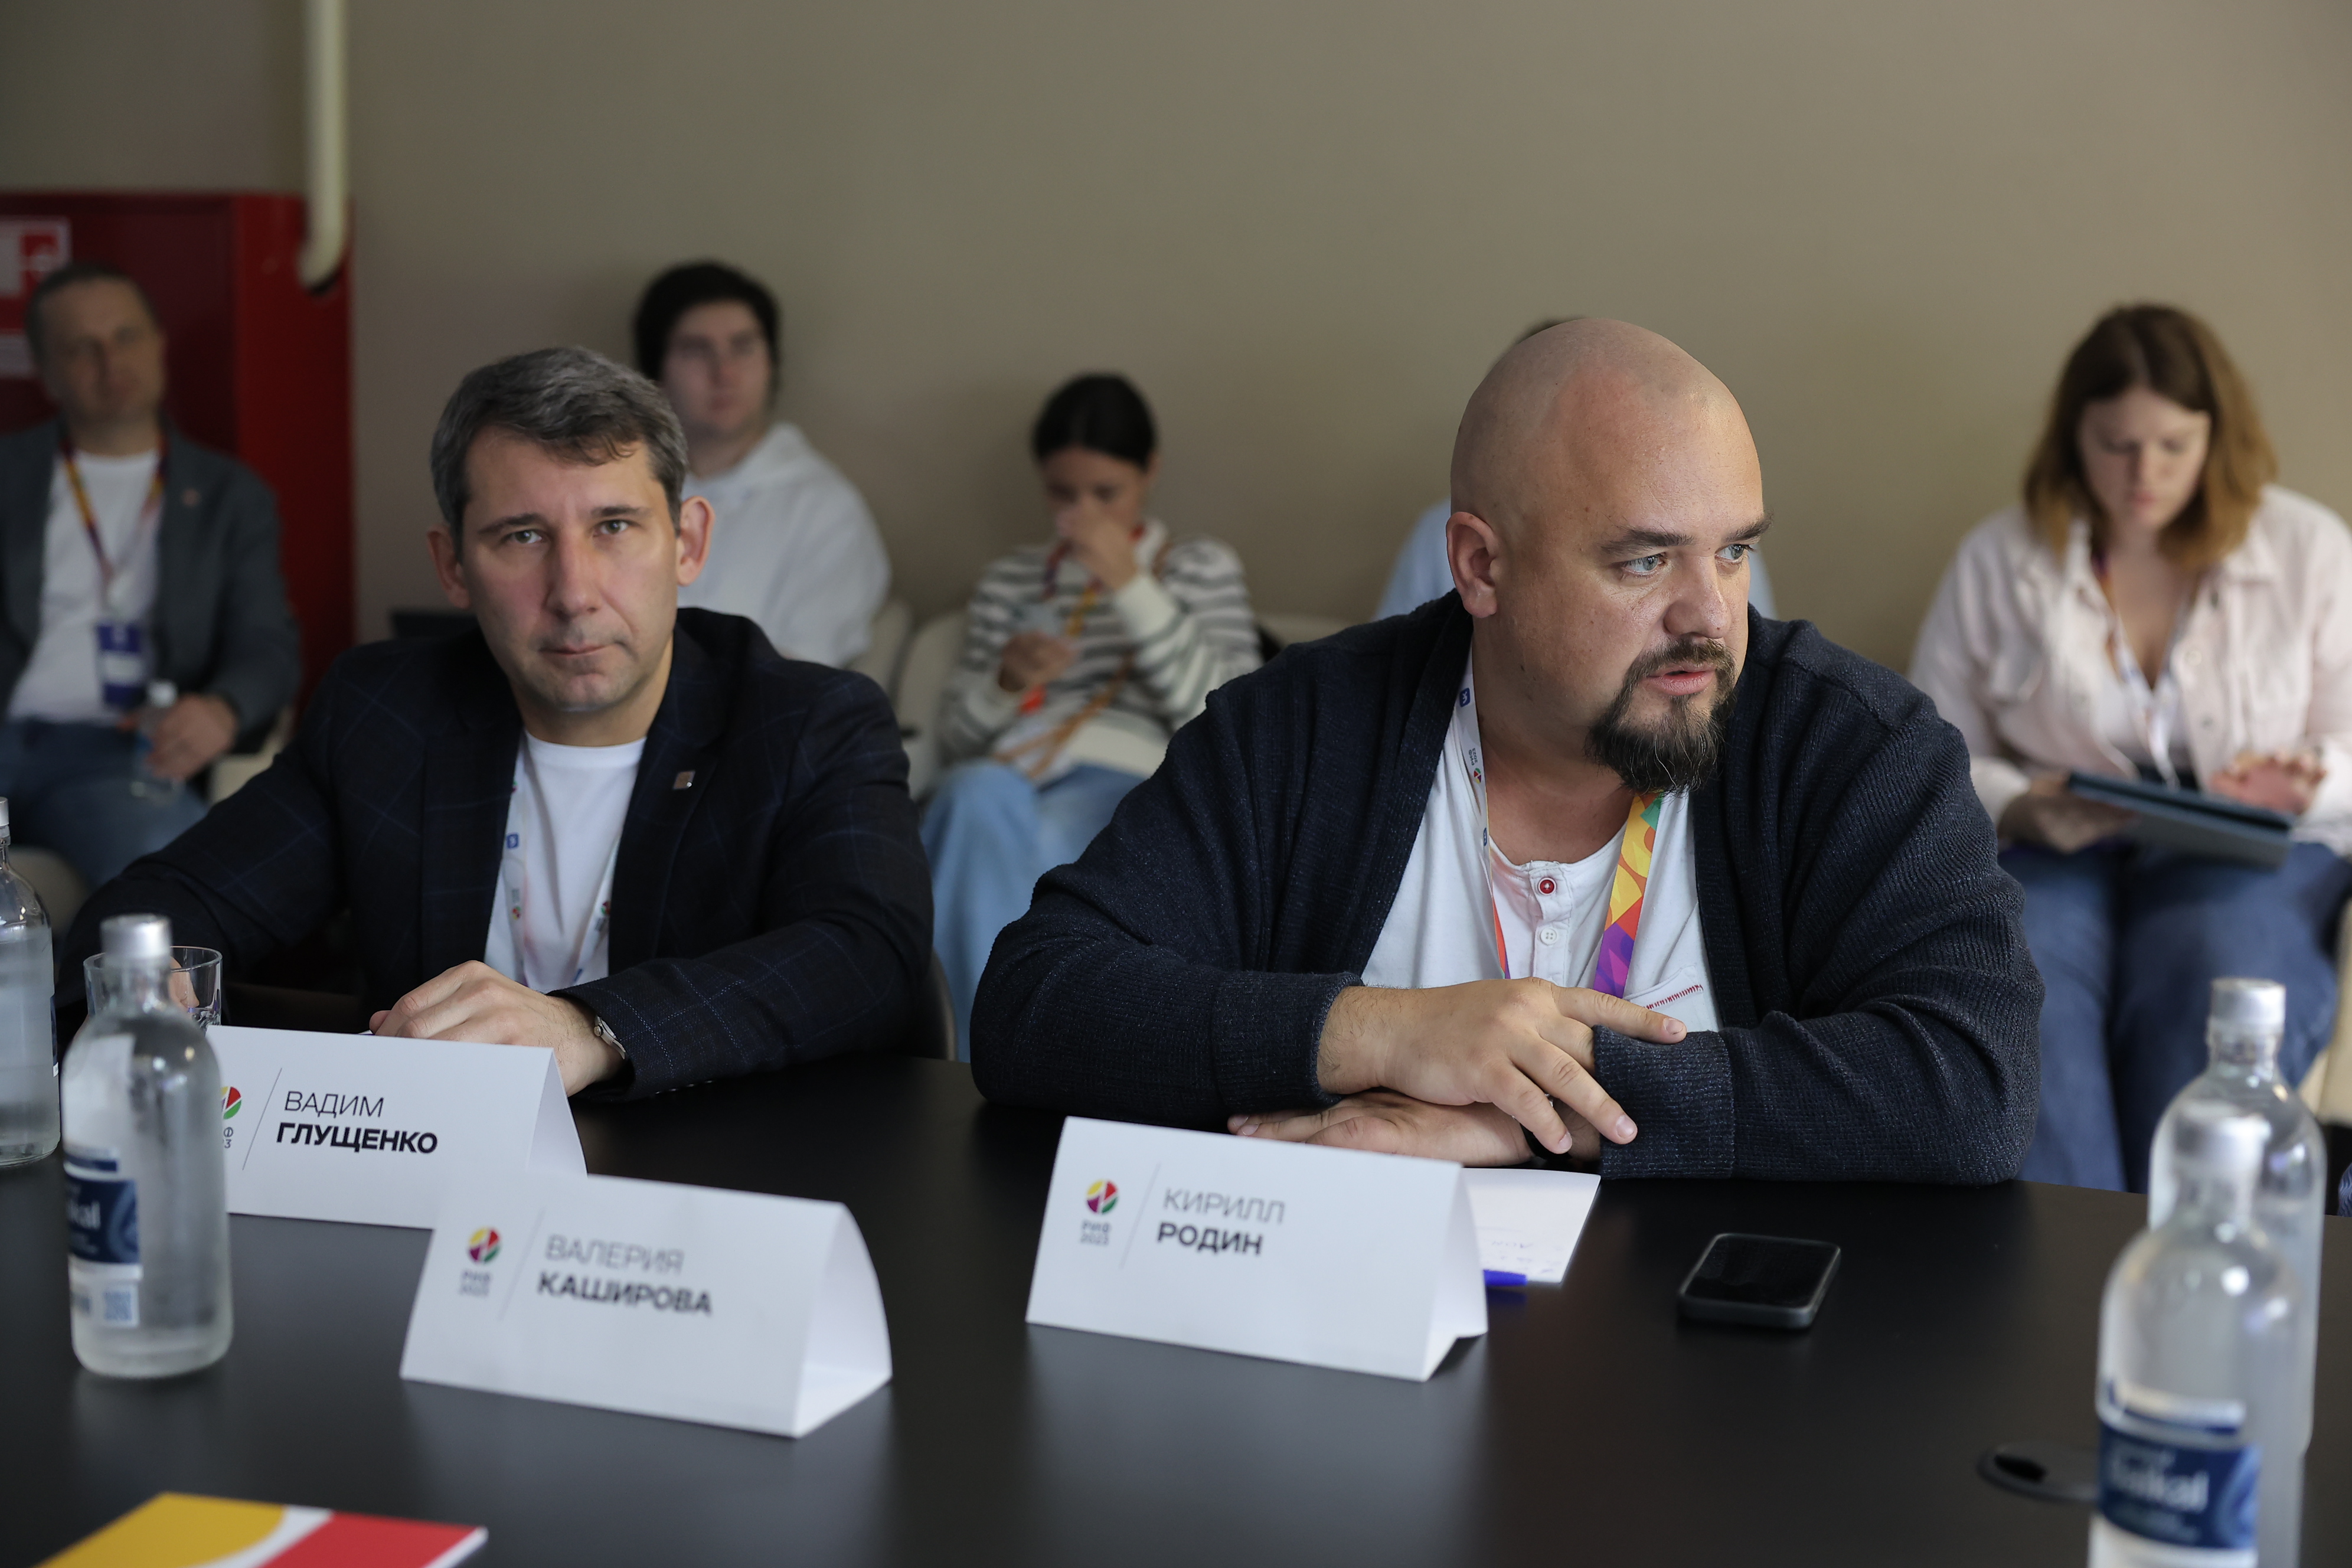 Experts formulated the main principles of the creation of effective content for young people in the modern Runet